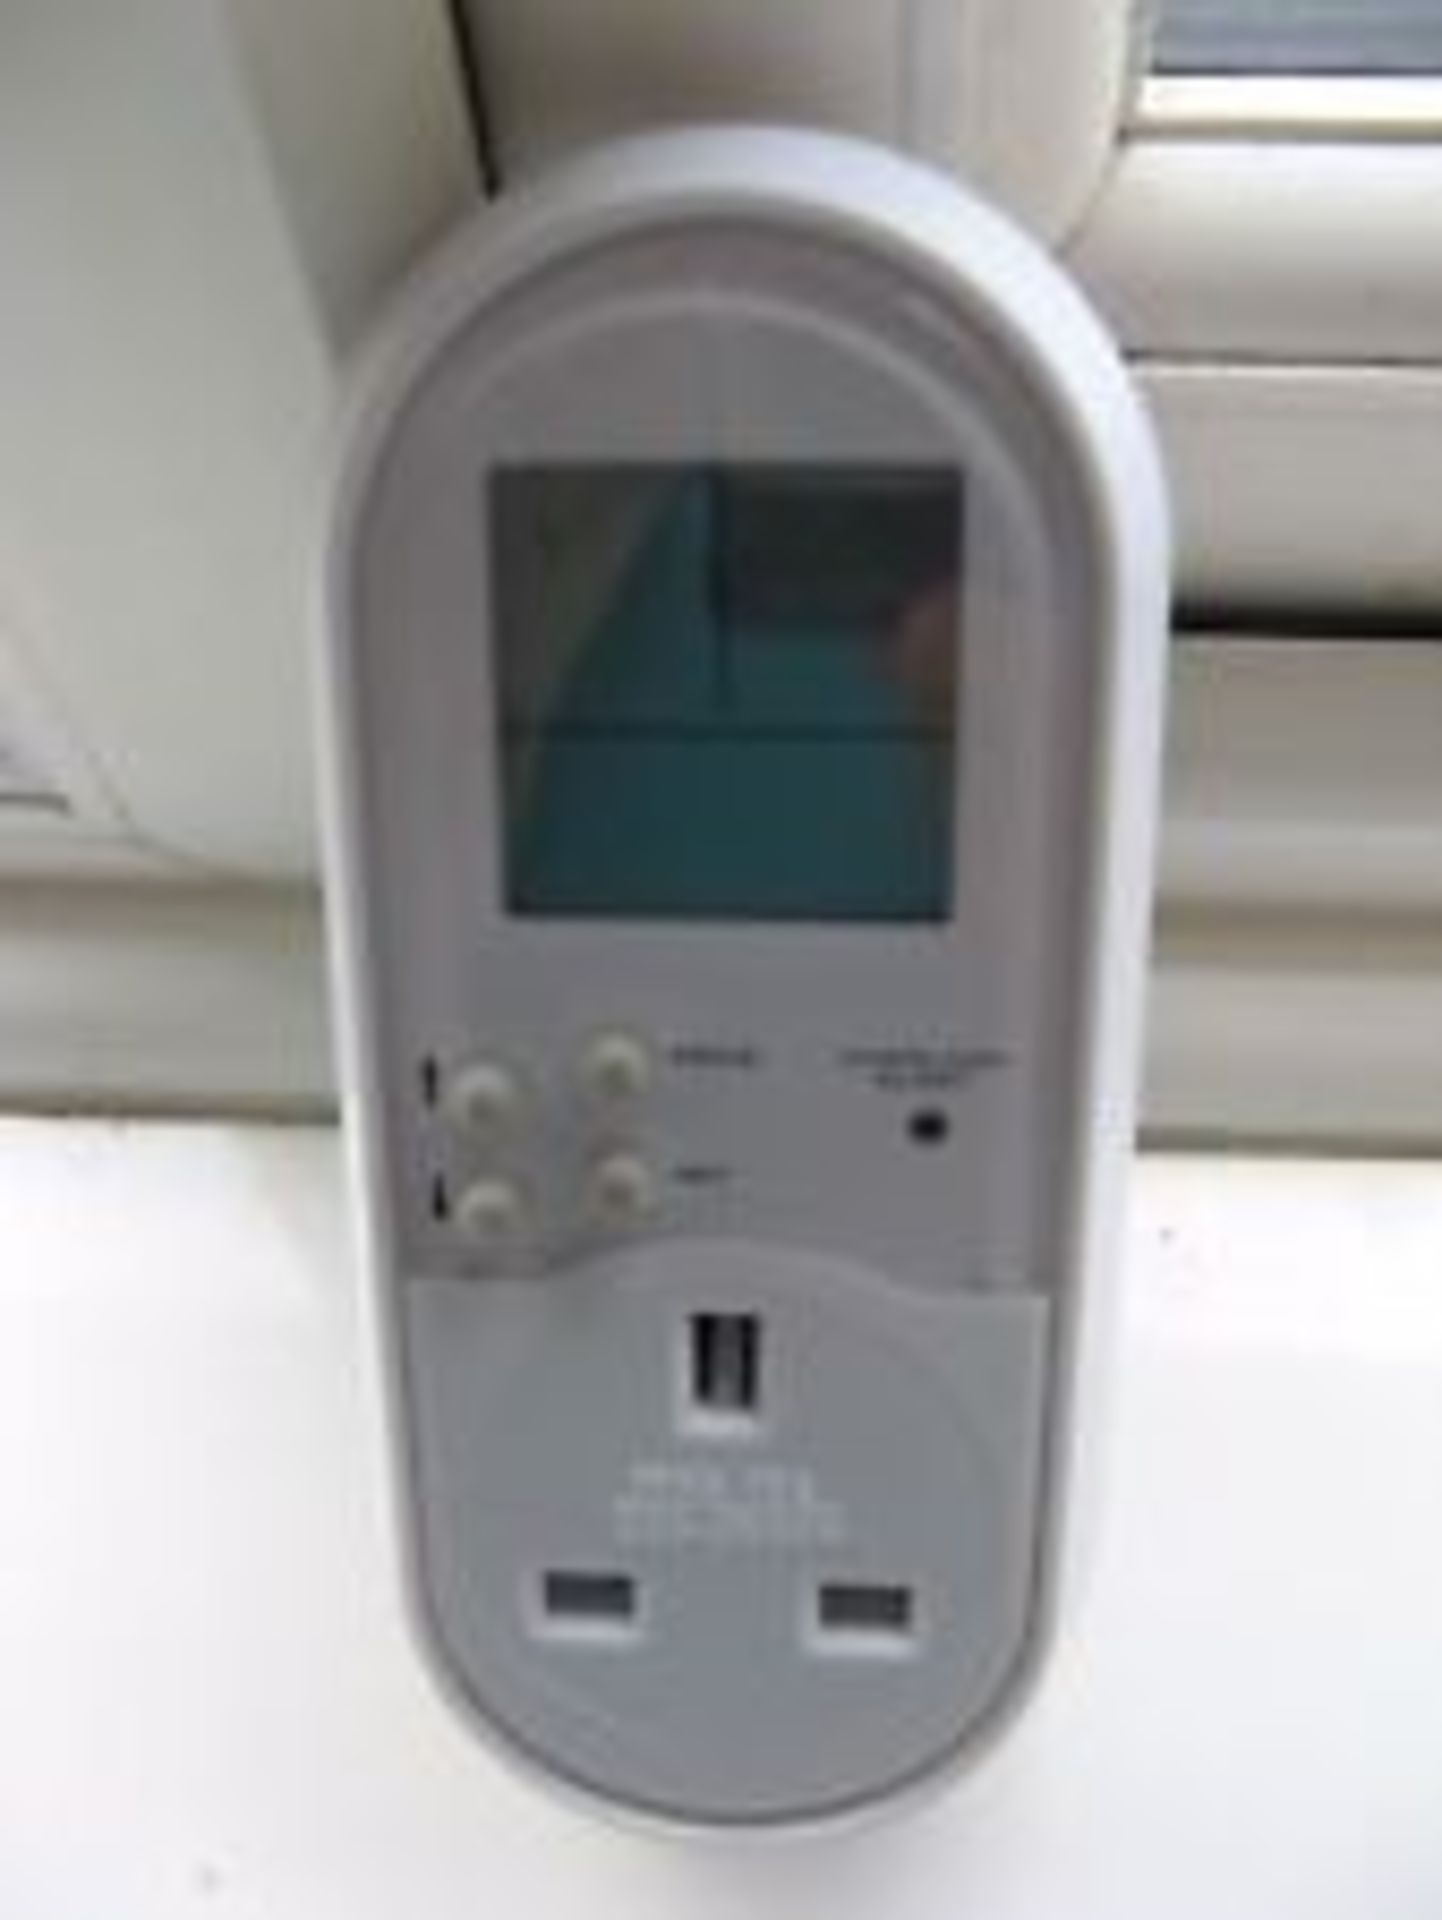 V *TRADE QTY* Brand New Work Zone Display Energy Consumption-Display Total Costs Power Meter X 4